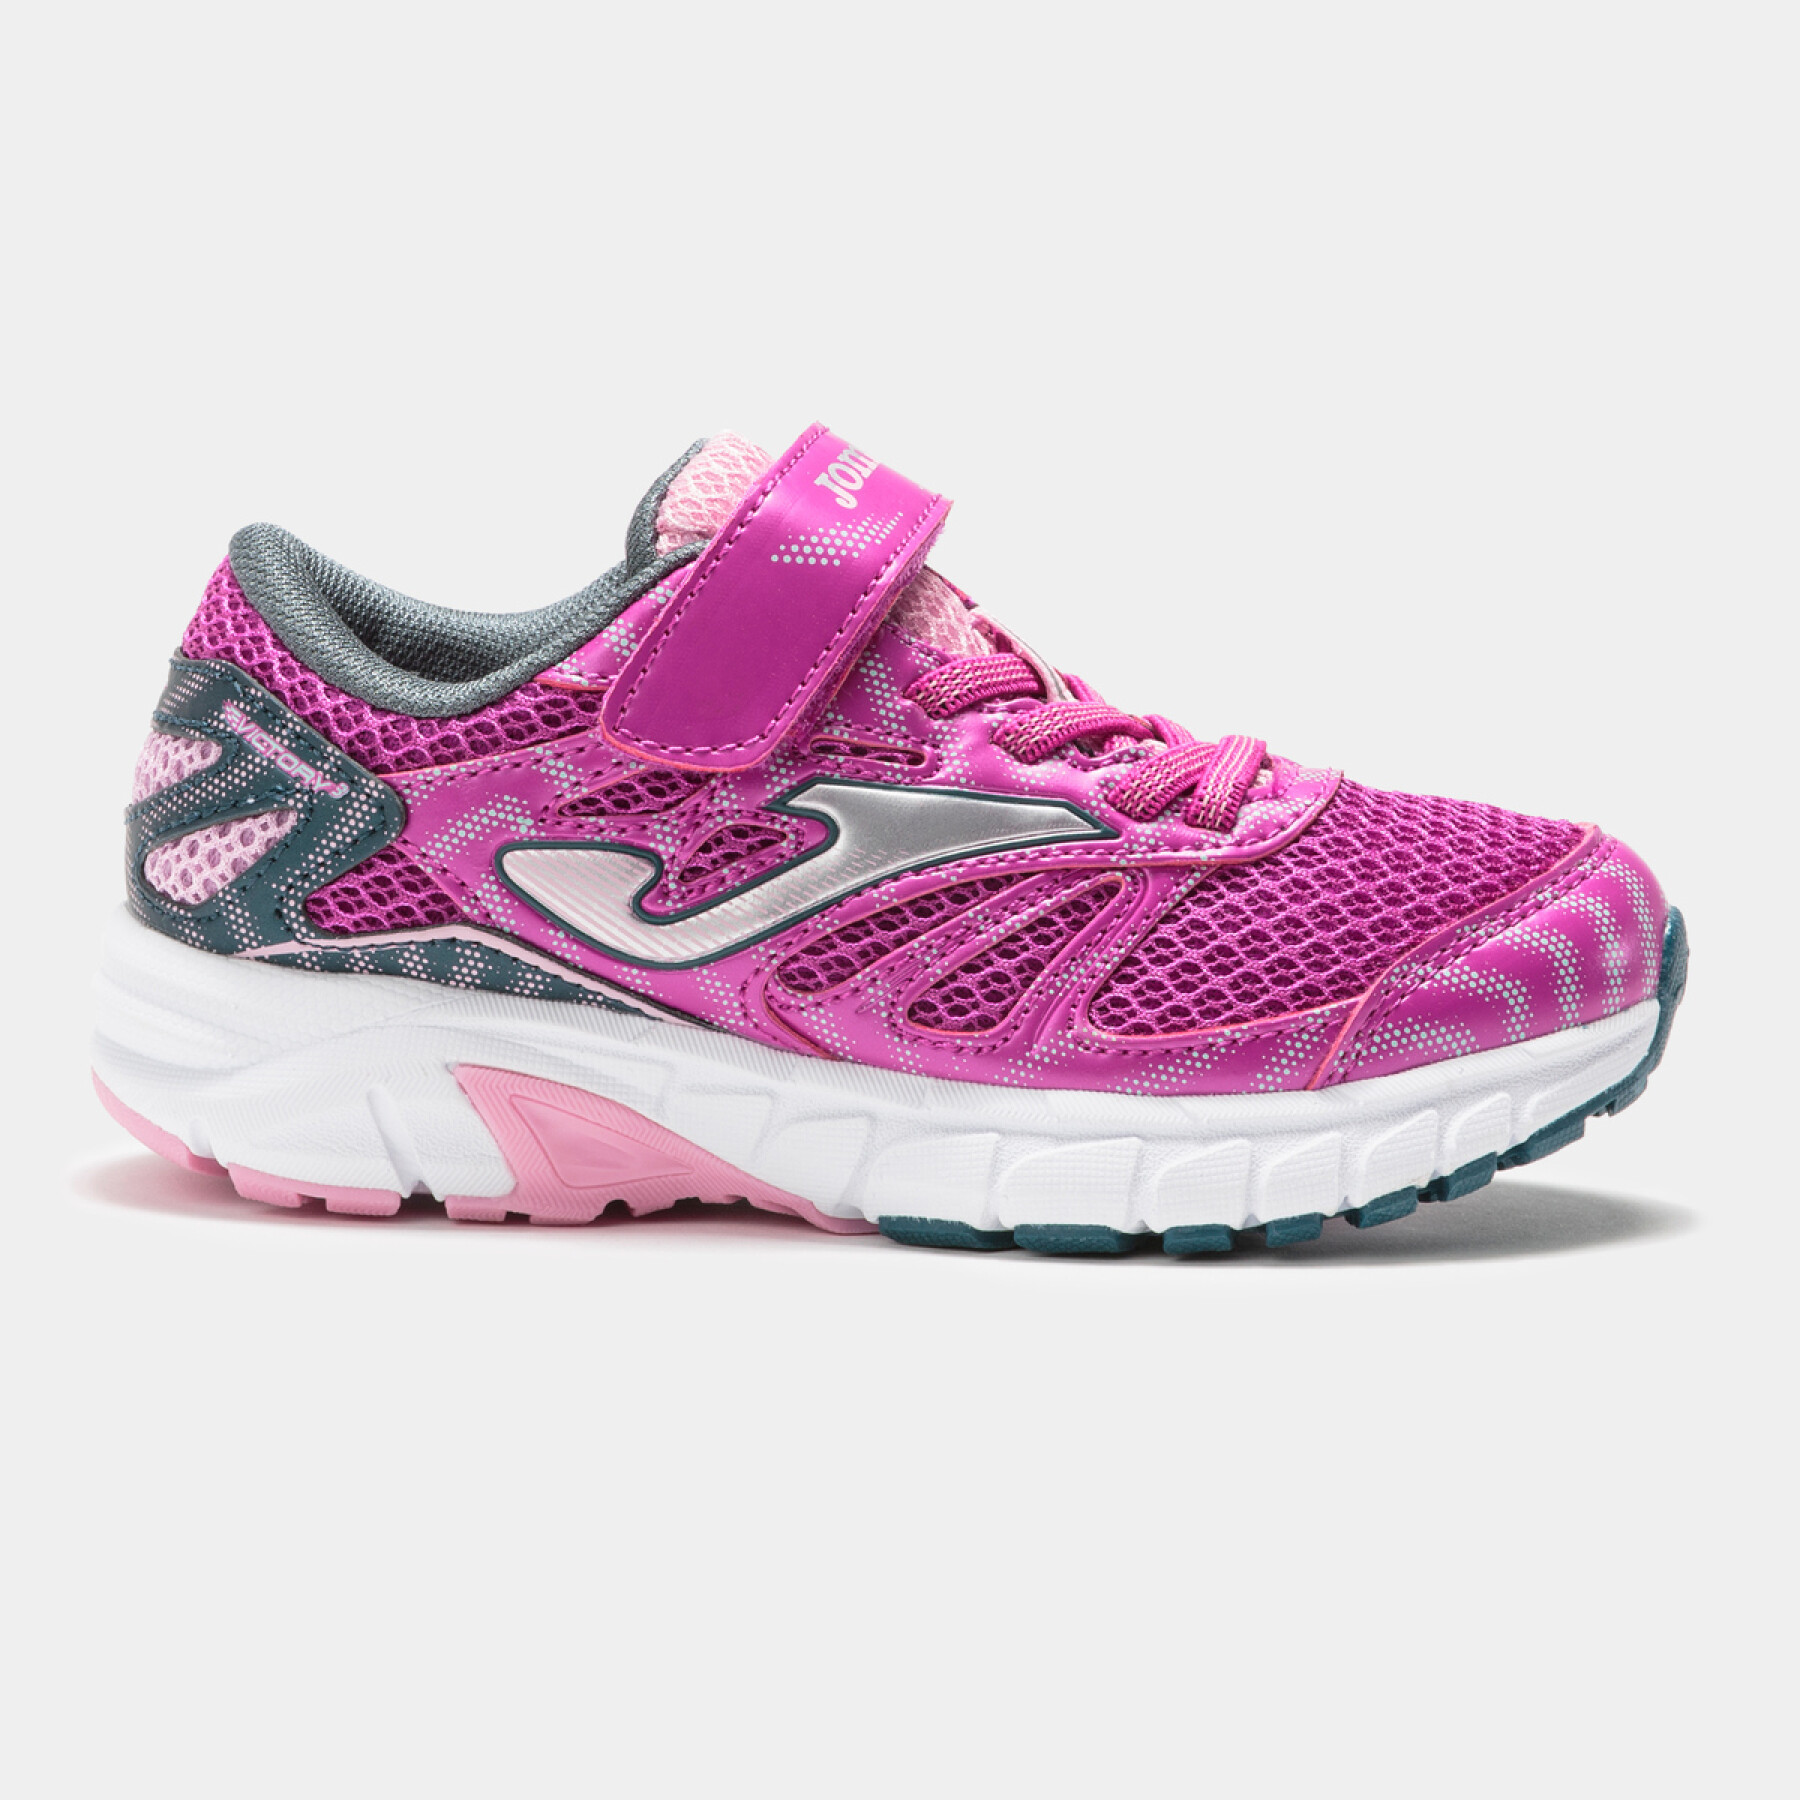 Chaussures de running fille Joma Victory J 2010 PETROLEO